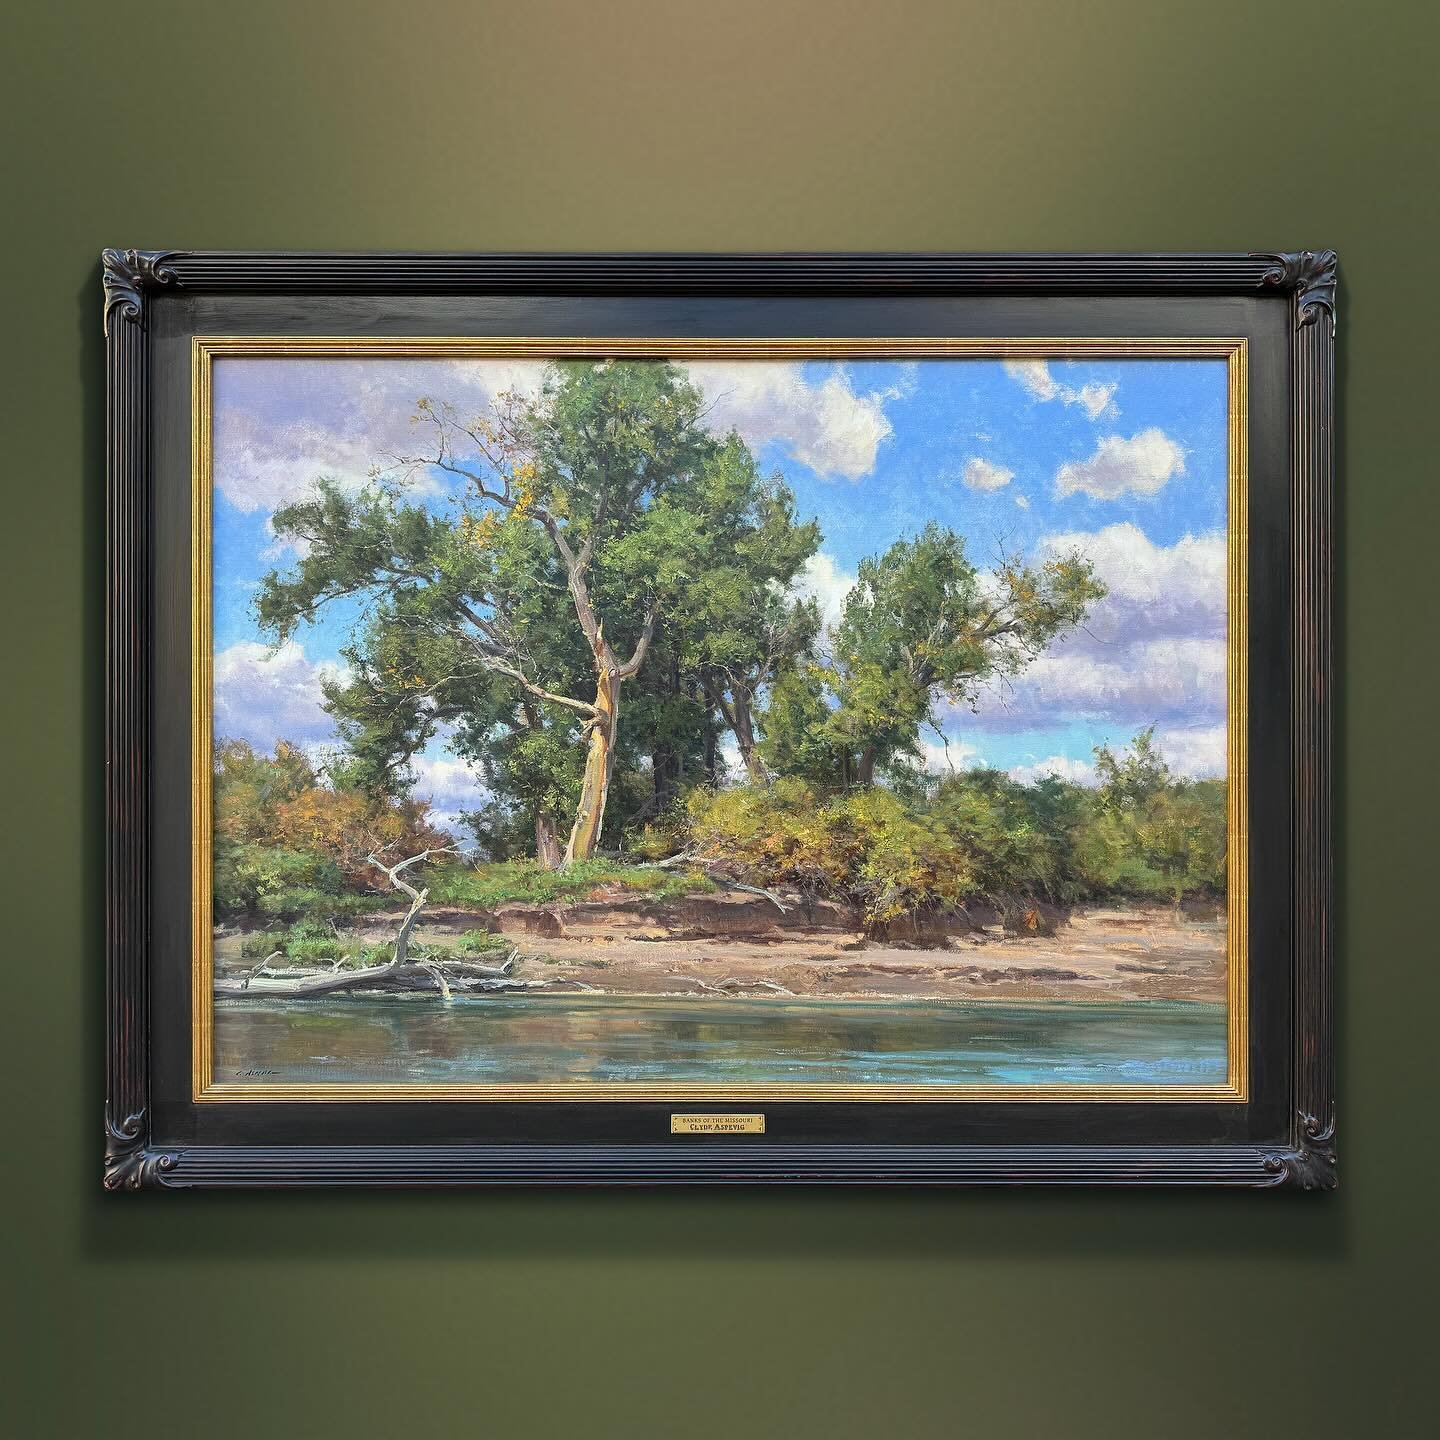 Clyde Aspevig produces captivating landscapes through his expressive brush strokes, capturing the essence of his subjects across America. We are proud to cary work by Aspevig, who has been honored as this year&rsquo;s Governor&rsquo;s Art Show Legacy